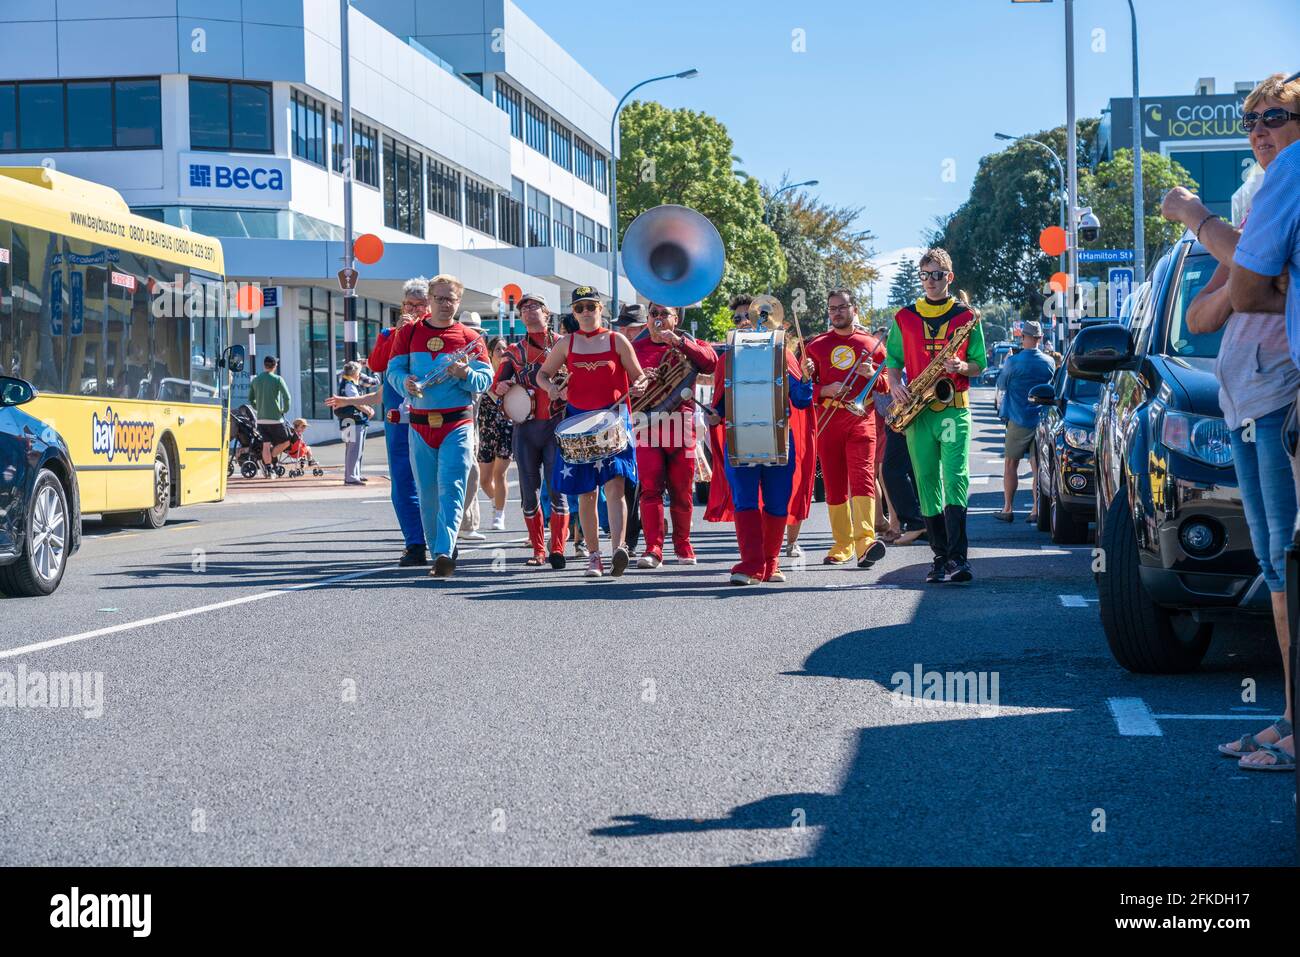 Tauranga New Zealand - April 3 2021; Superhero Band marching along city street past buildings and people during National Jazz Festival Stock Photo